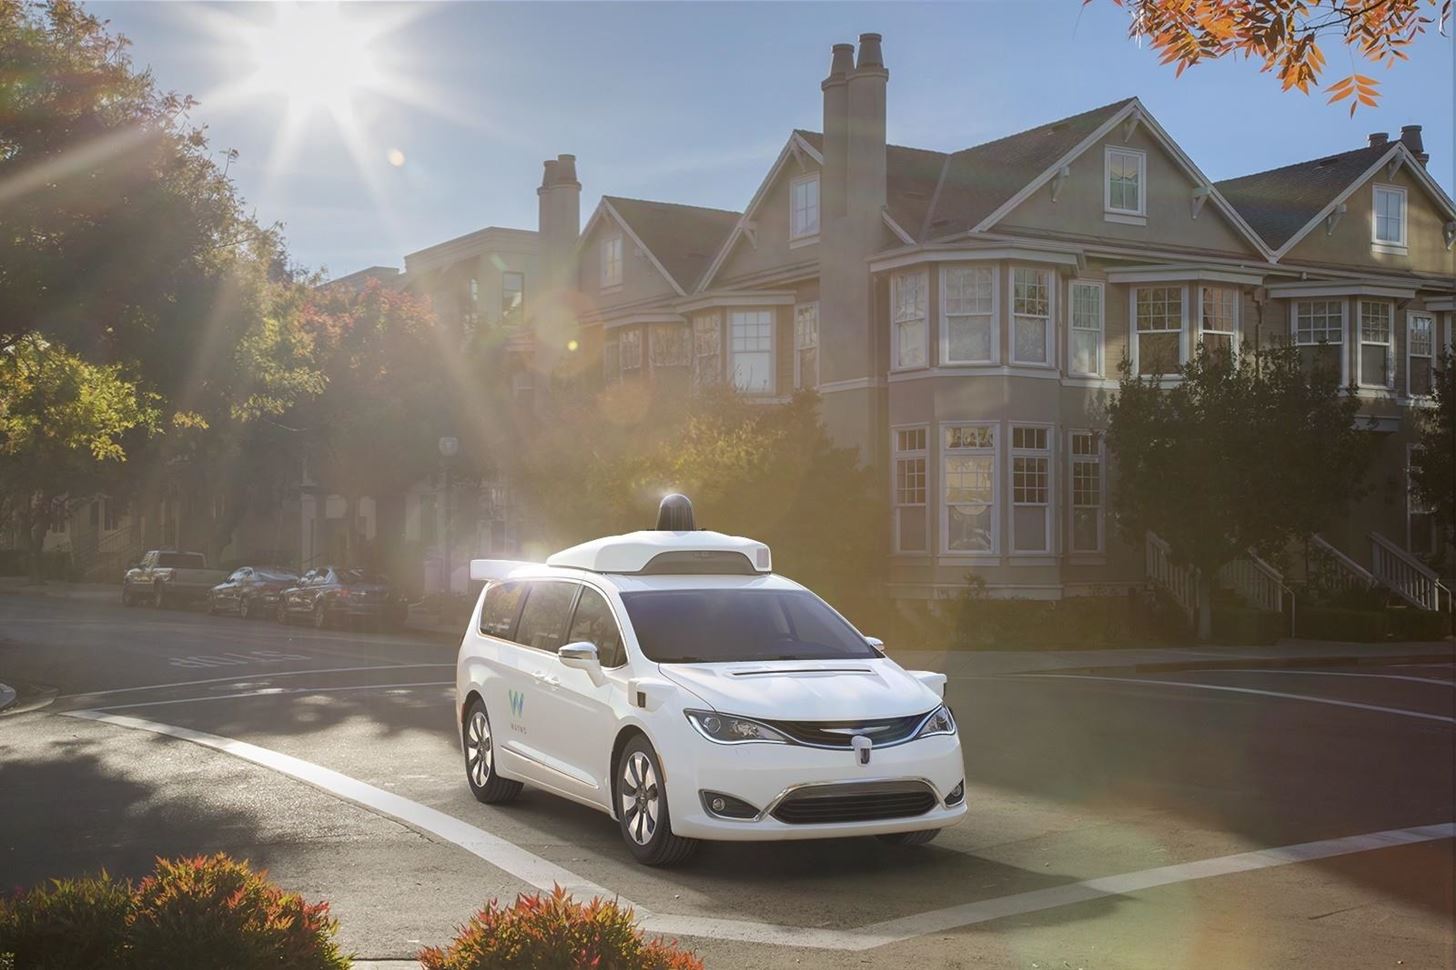 Google's New Self-Driving Car Spinout Waymo Debuts Their Fleet of 100 Chrysler Pacificas